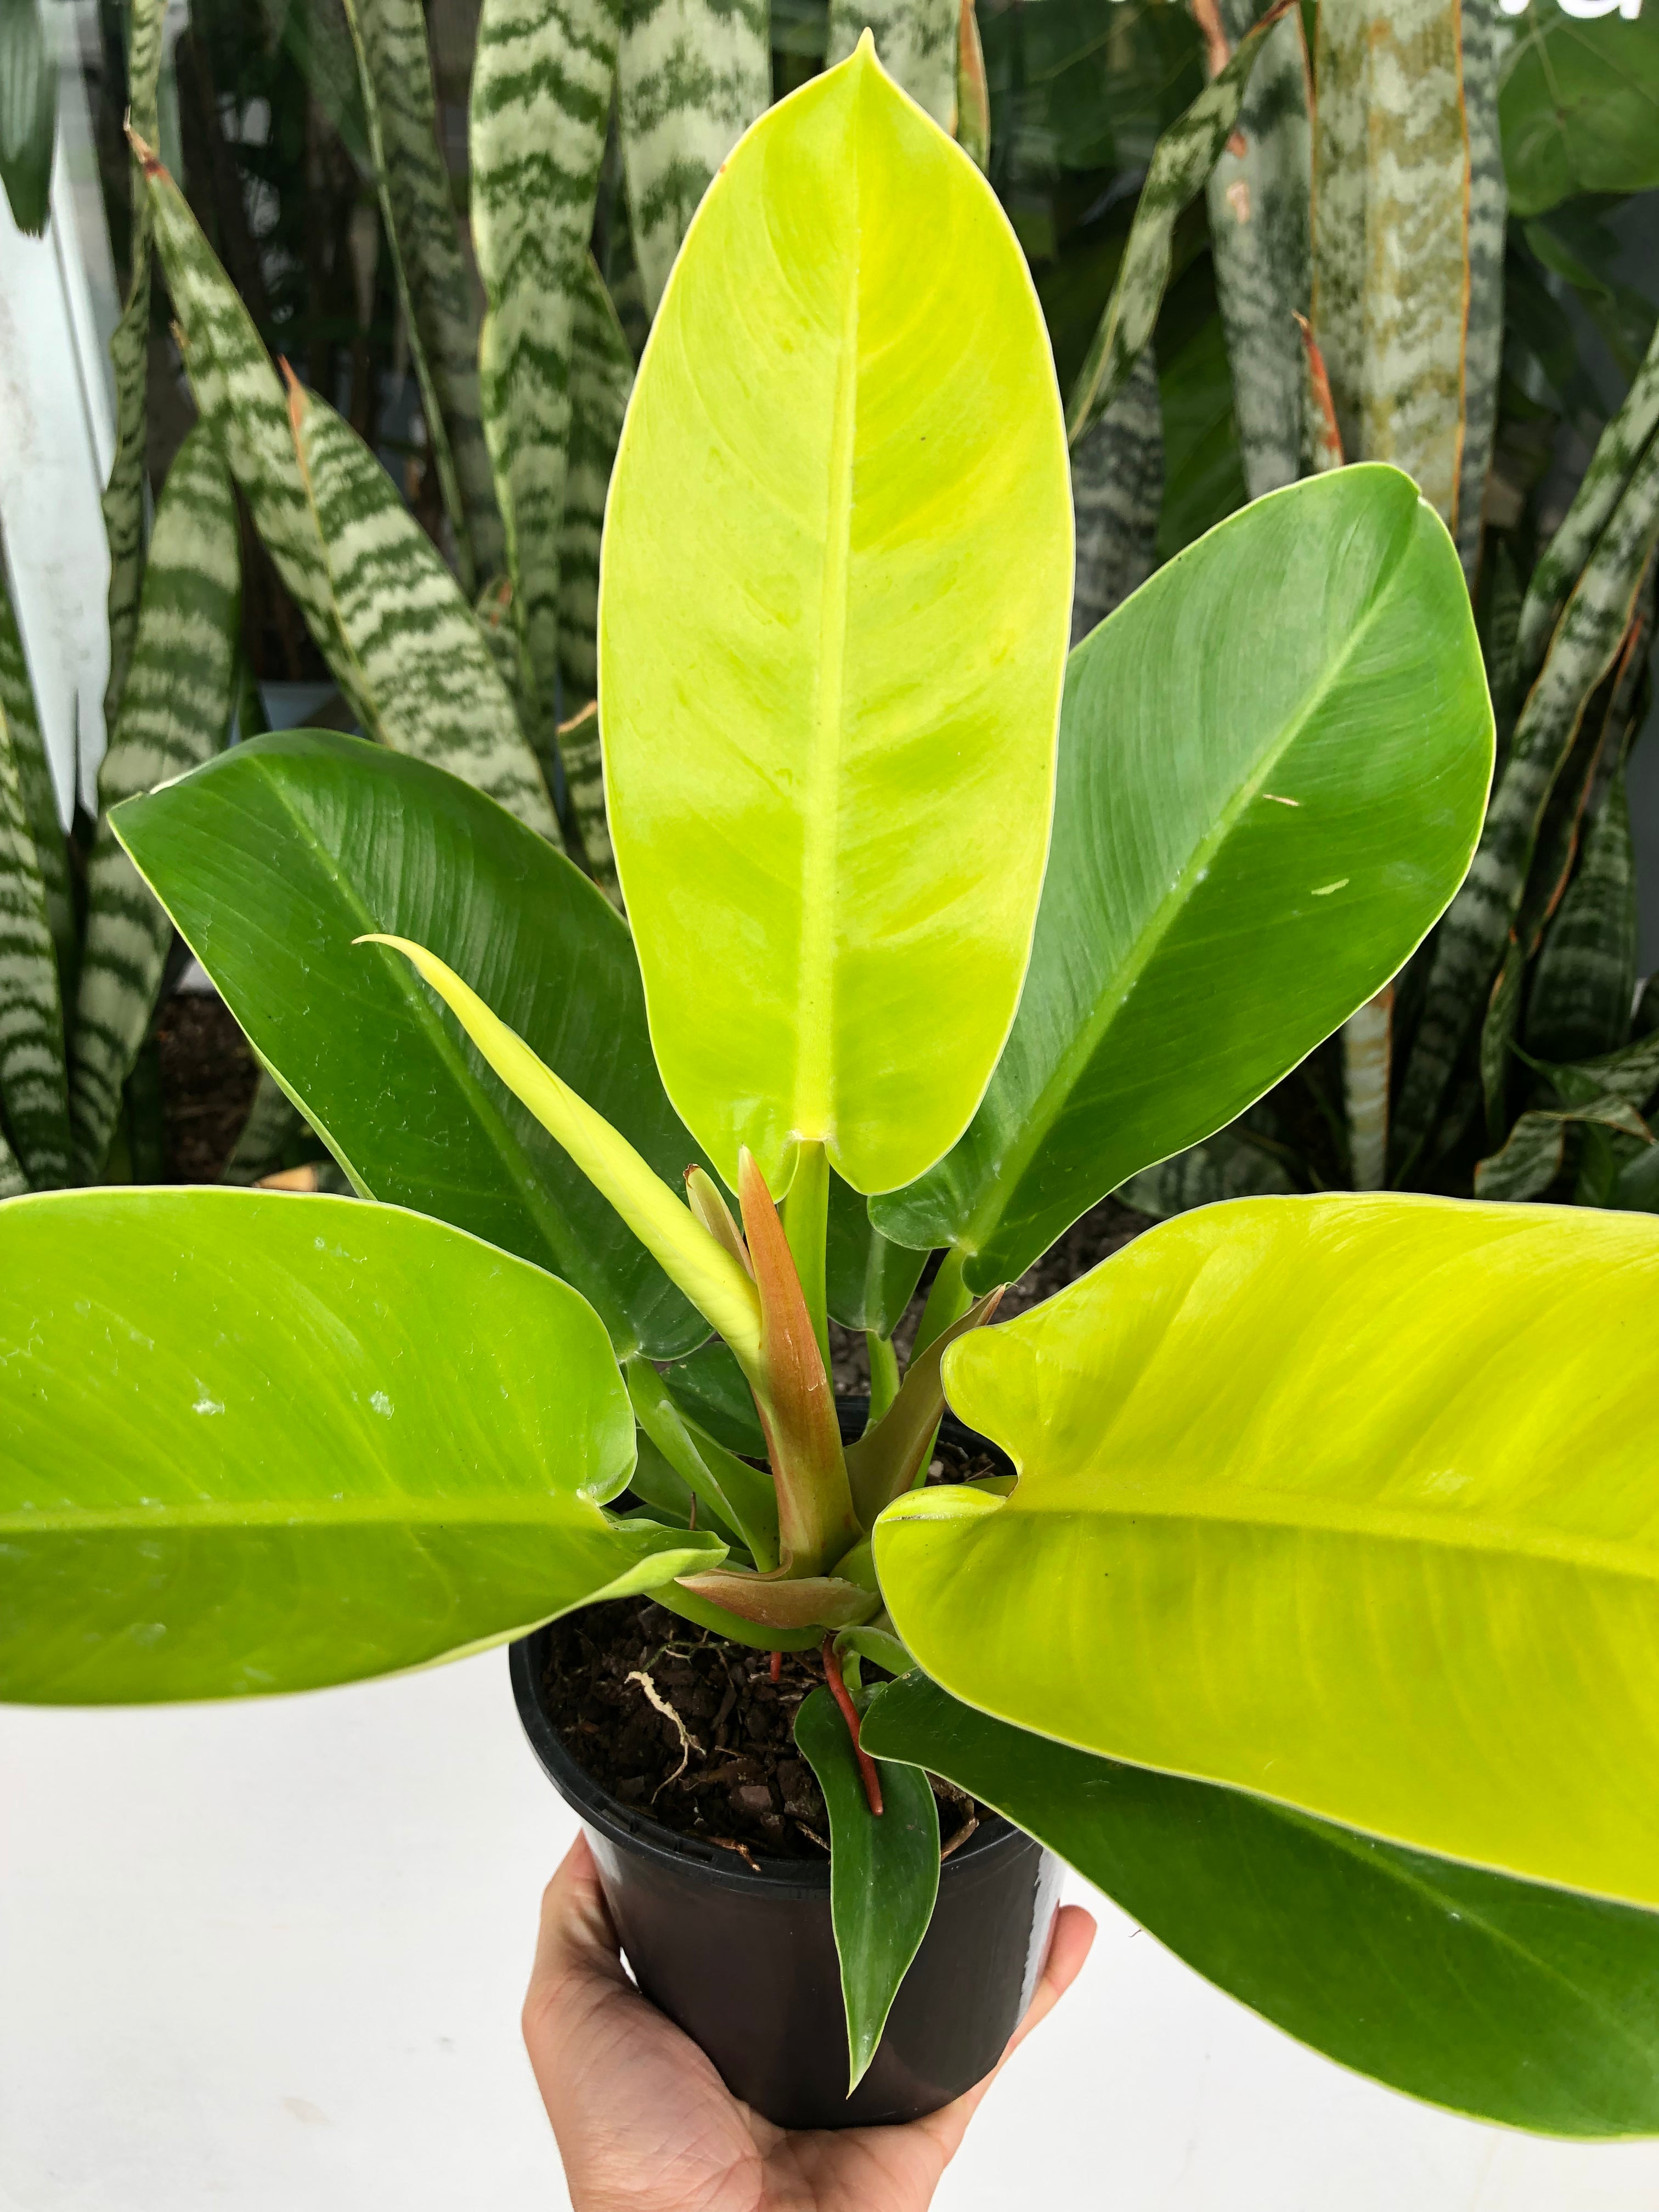 Philodendron hederaceum ‘Moonlight’ - Moonlight Philodendron